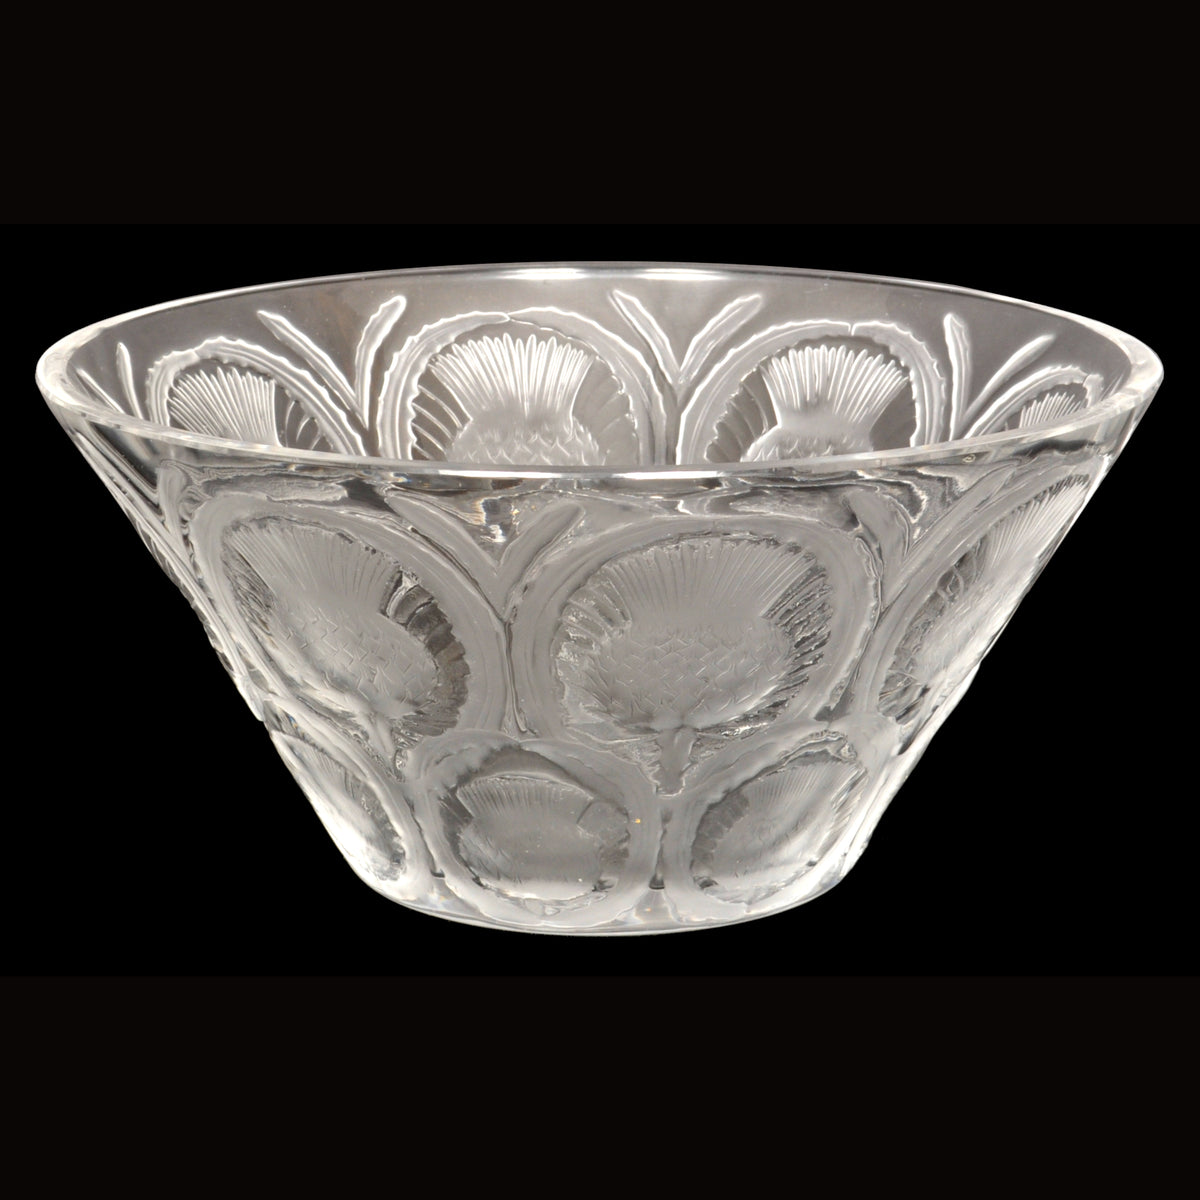 Antique French Lalique Crystal Glass Center Bowl "Chardons" Thistle Pattern, circa 1930